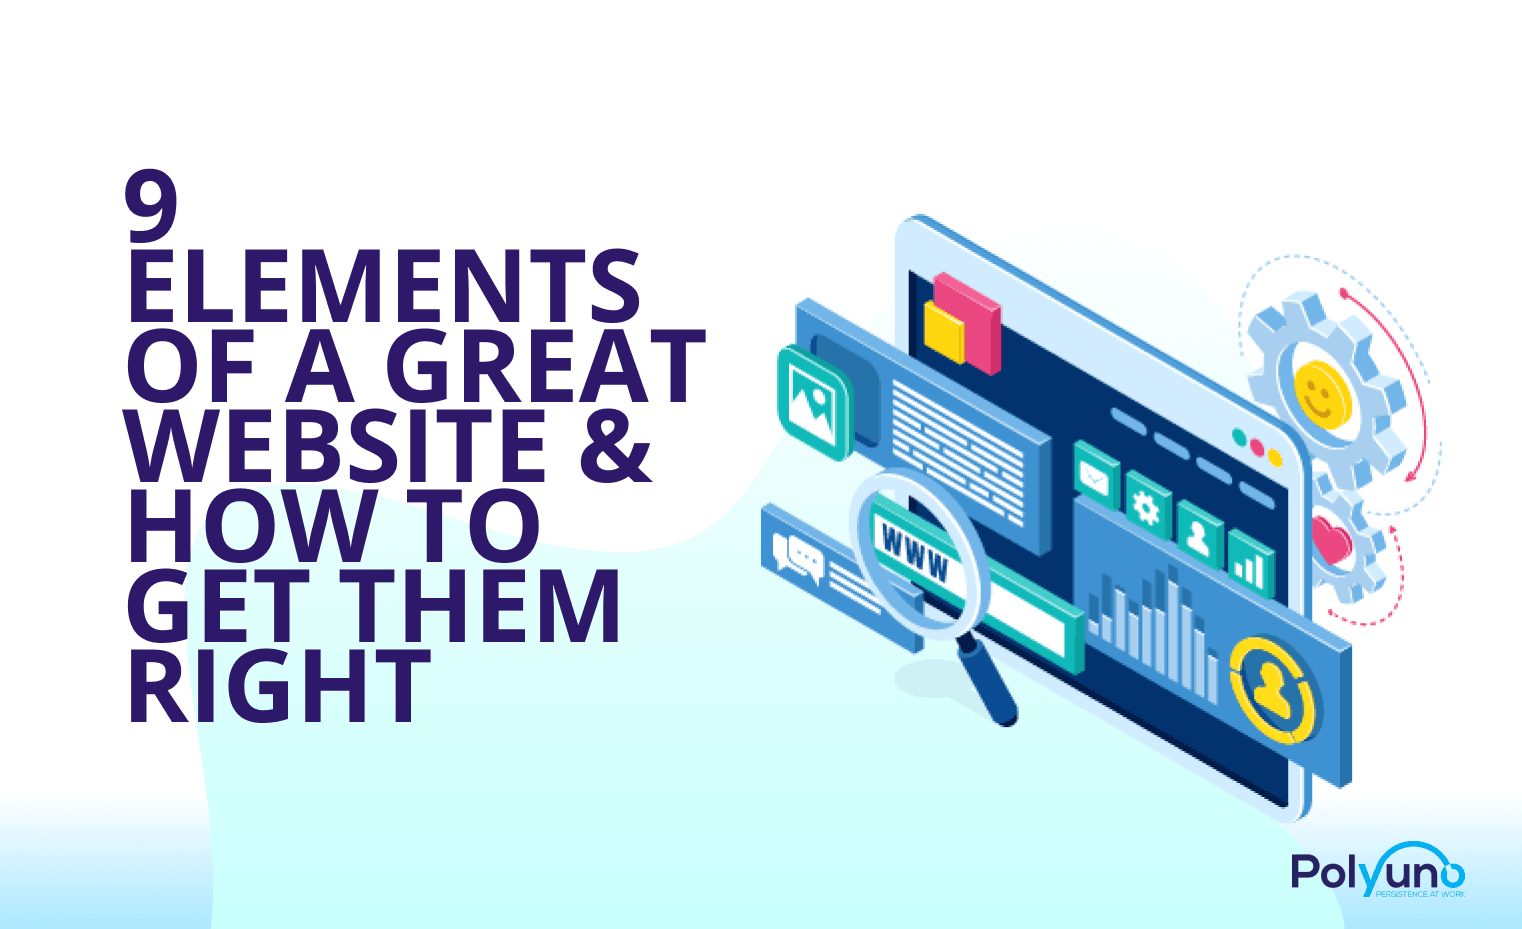 9 Elements Of A Great Website & How To Get Them Right